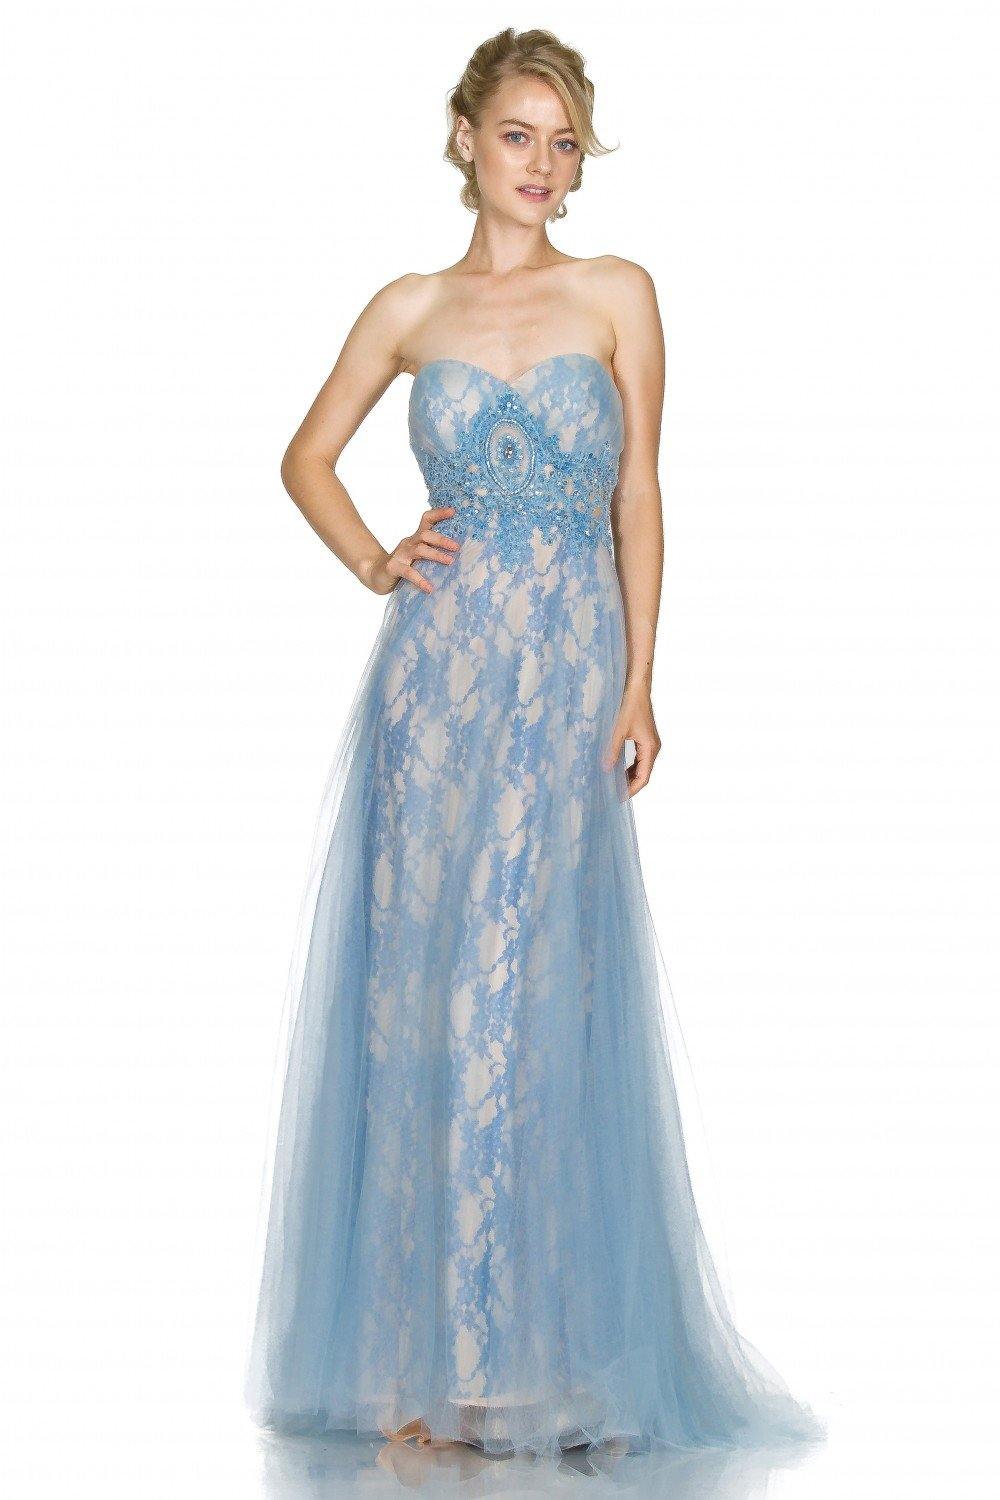 Prom Long Lace Dress - The Dress Outlet